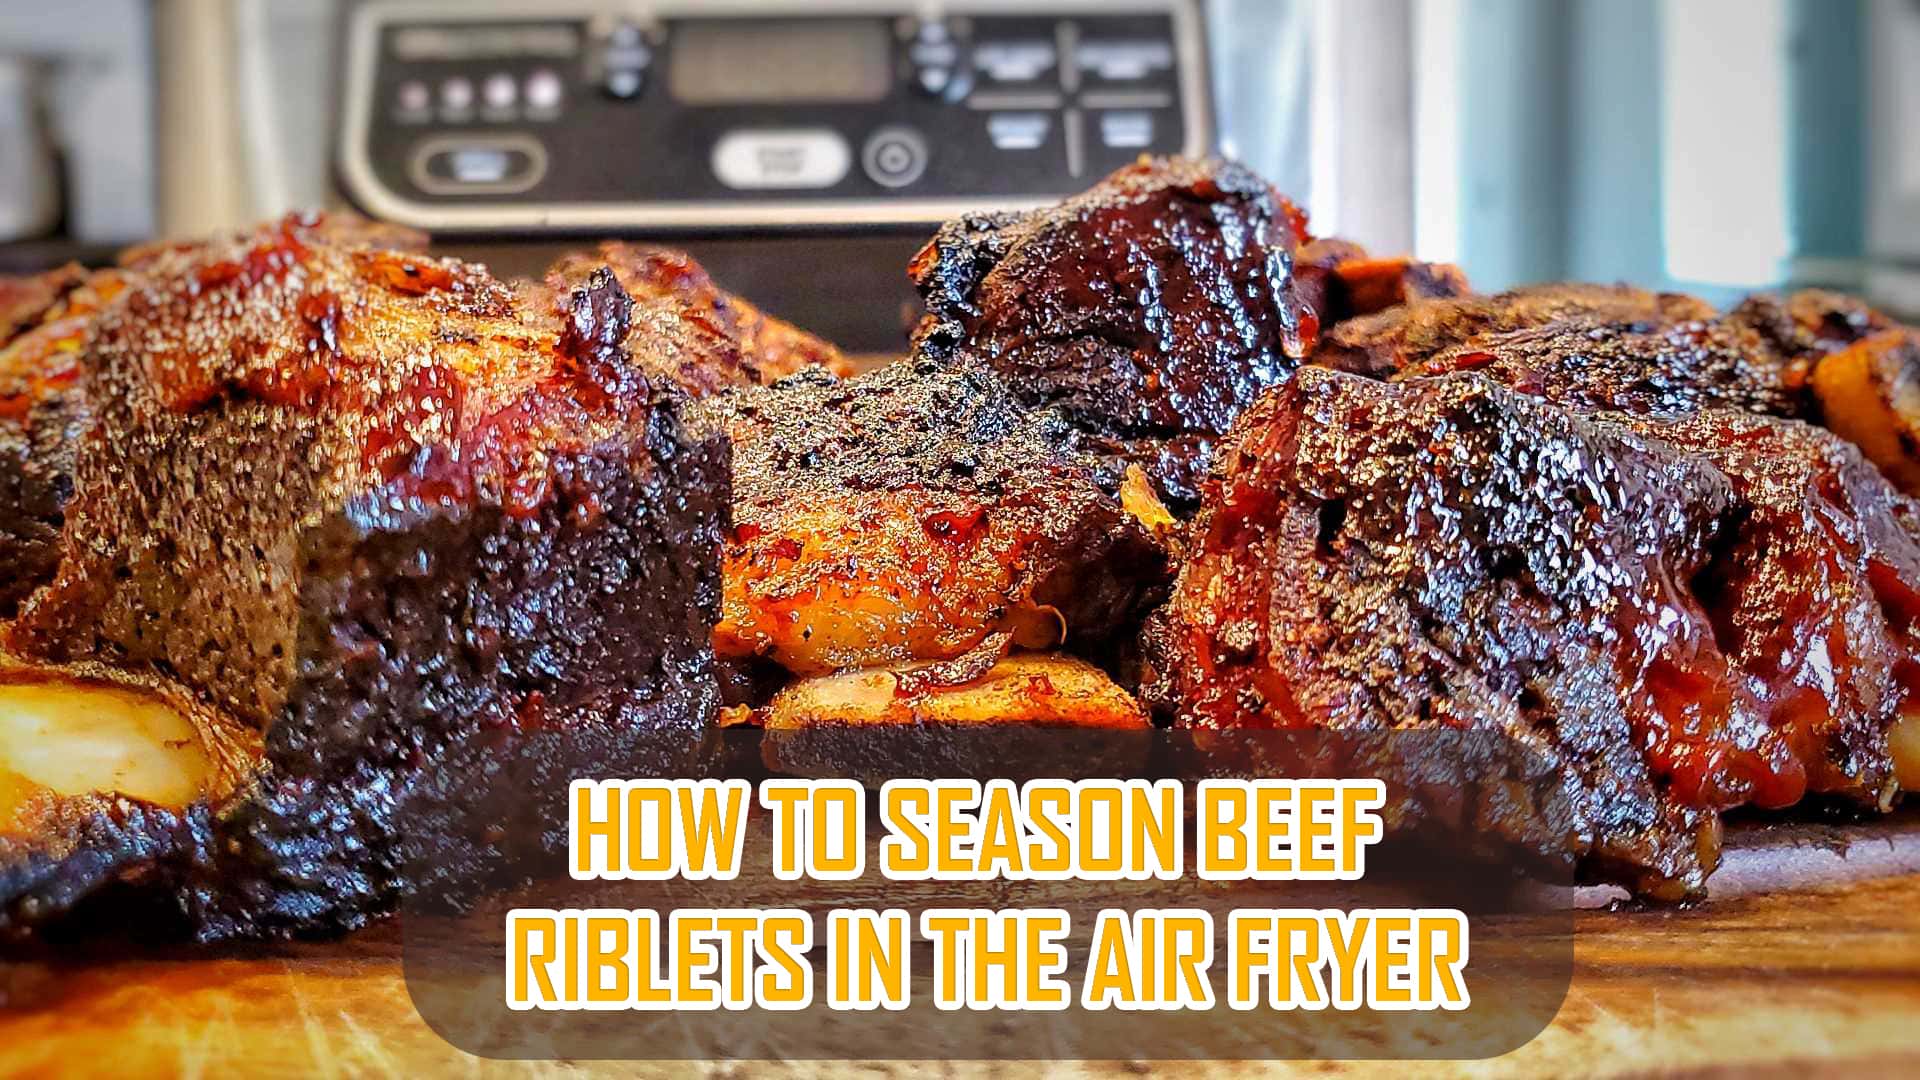 How to season beef riblets in the air fryer